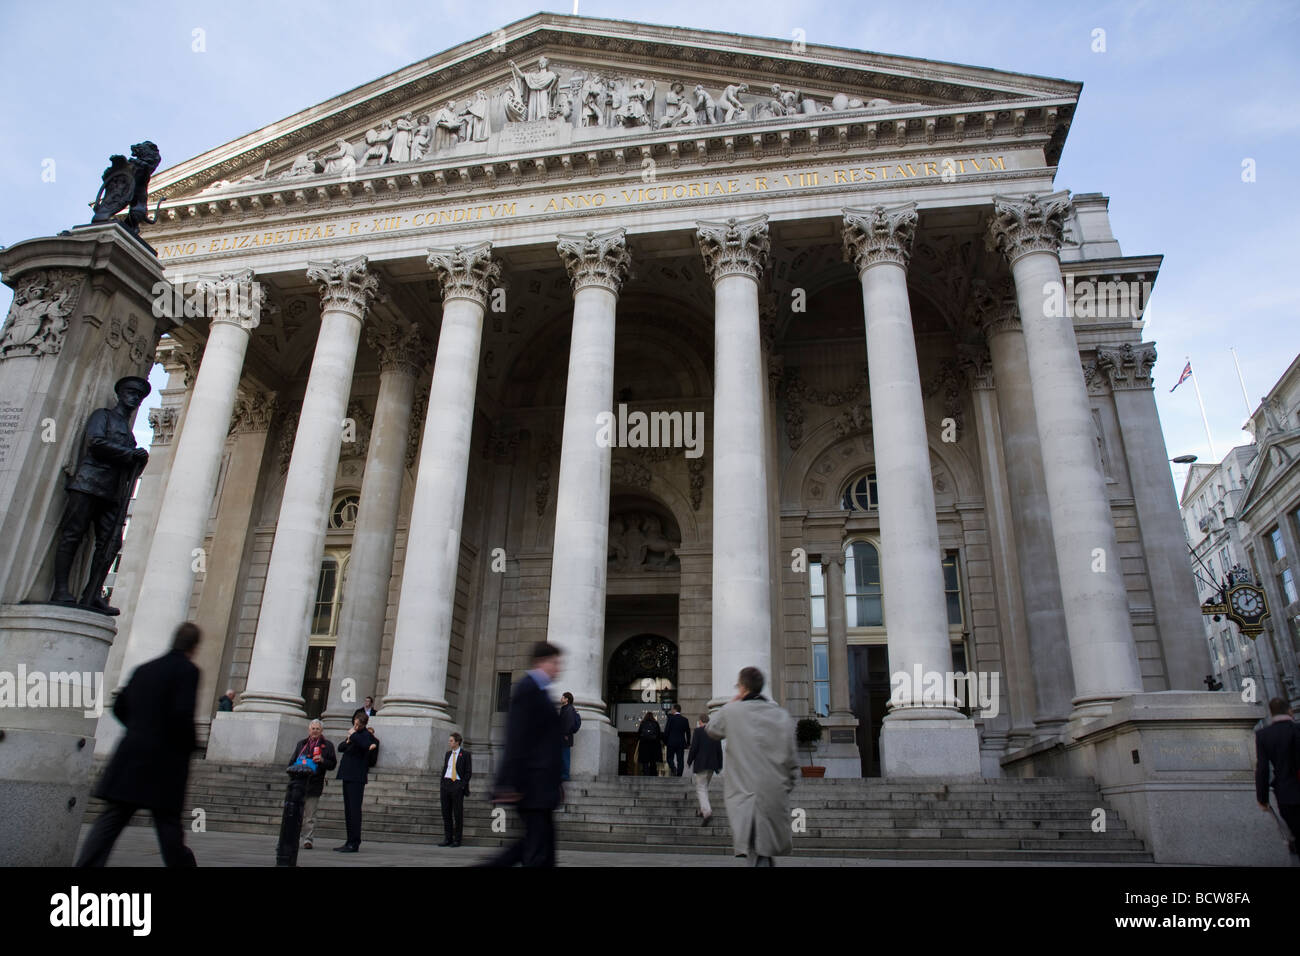 Front entrance to the Royal Exchange in the City of London, England. Stock Photo